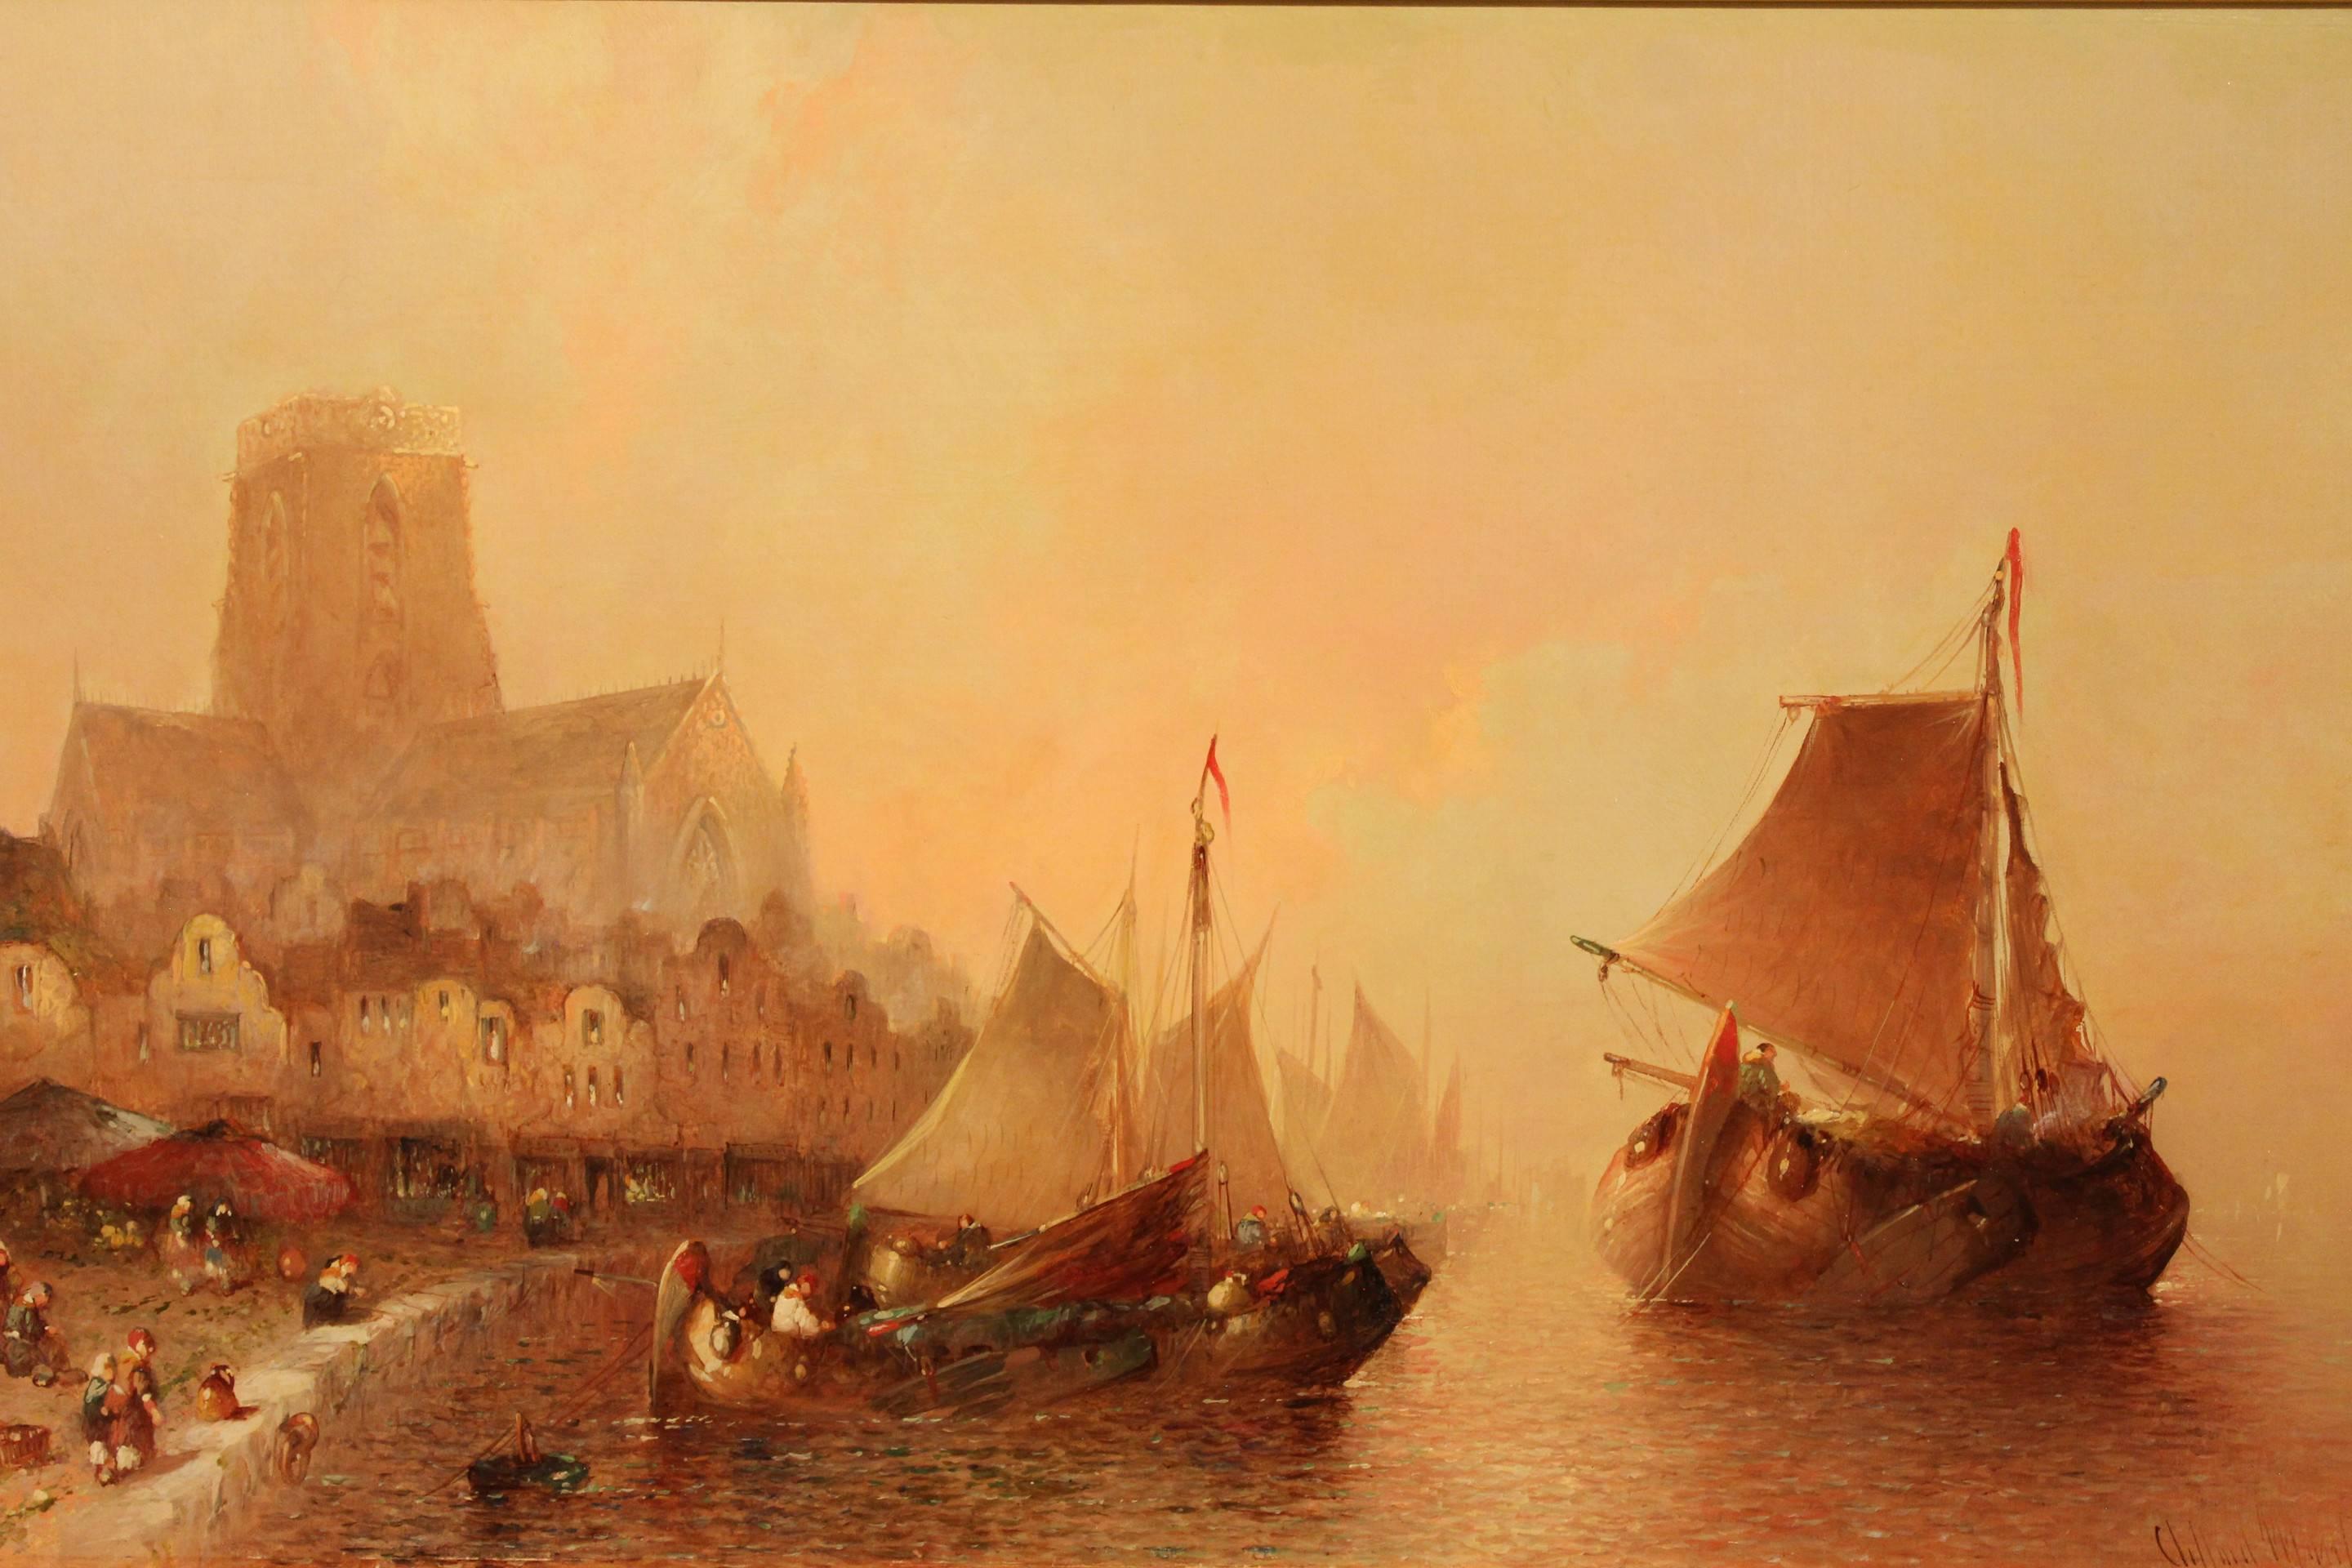 Dutch townscape by Clifford Montague. Clifford Montague, 1845-1901 Birmingham painter of continental townscapes and landscapes, exhibited throughout Britain. Son of Alfred Montague RBA oil on canvas, measure: 20 x 28